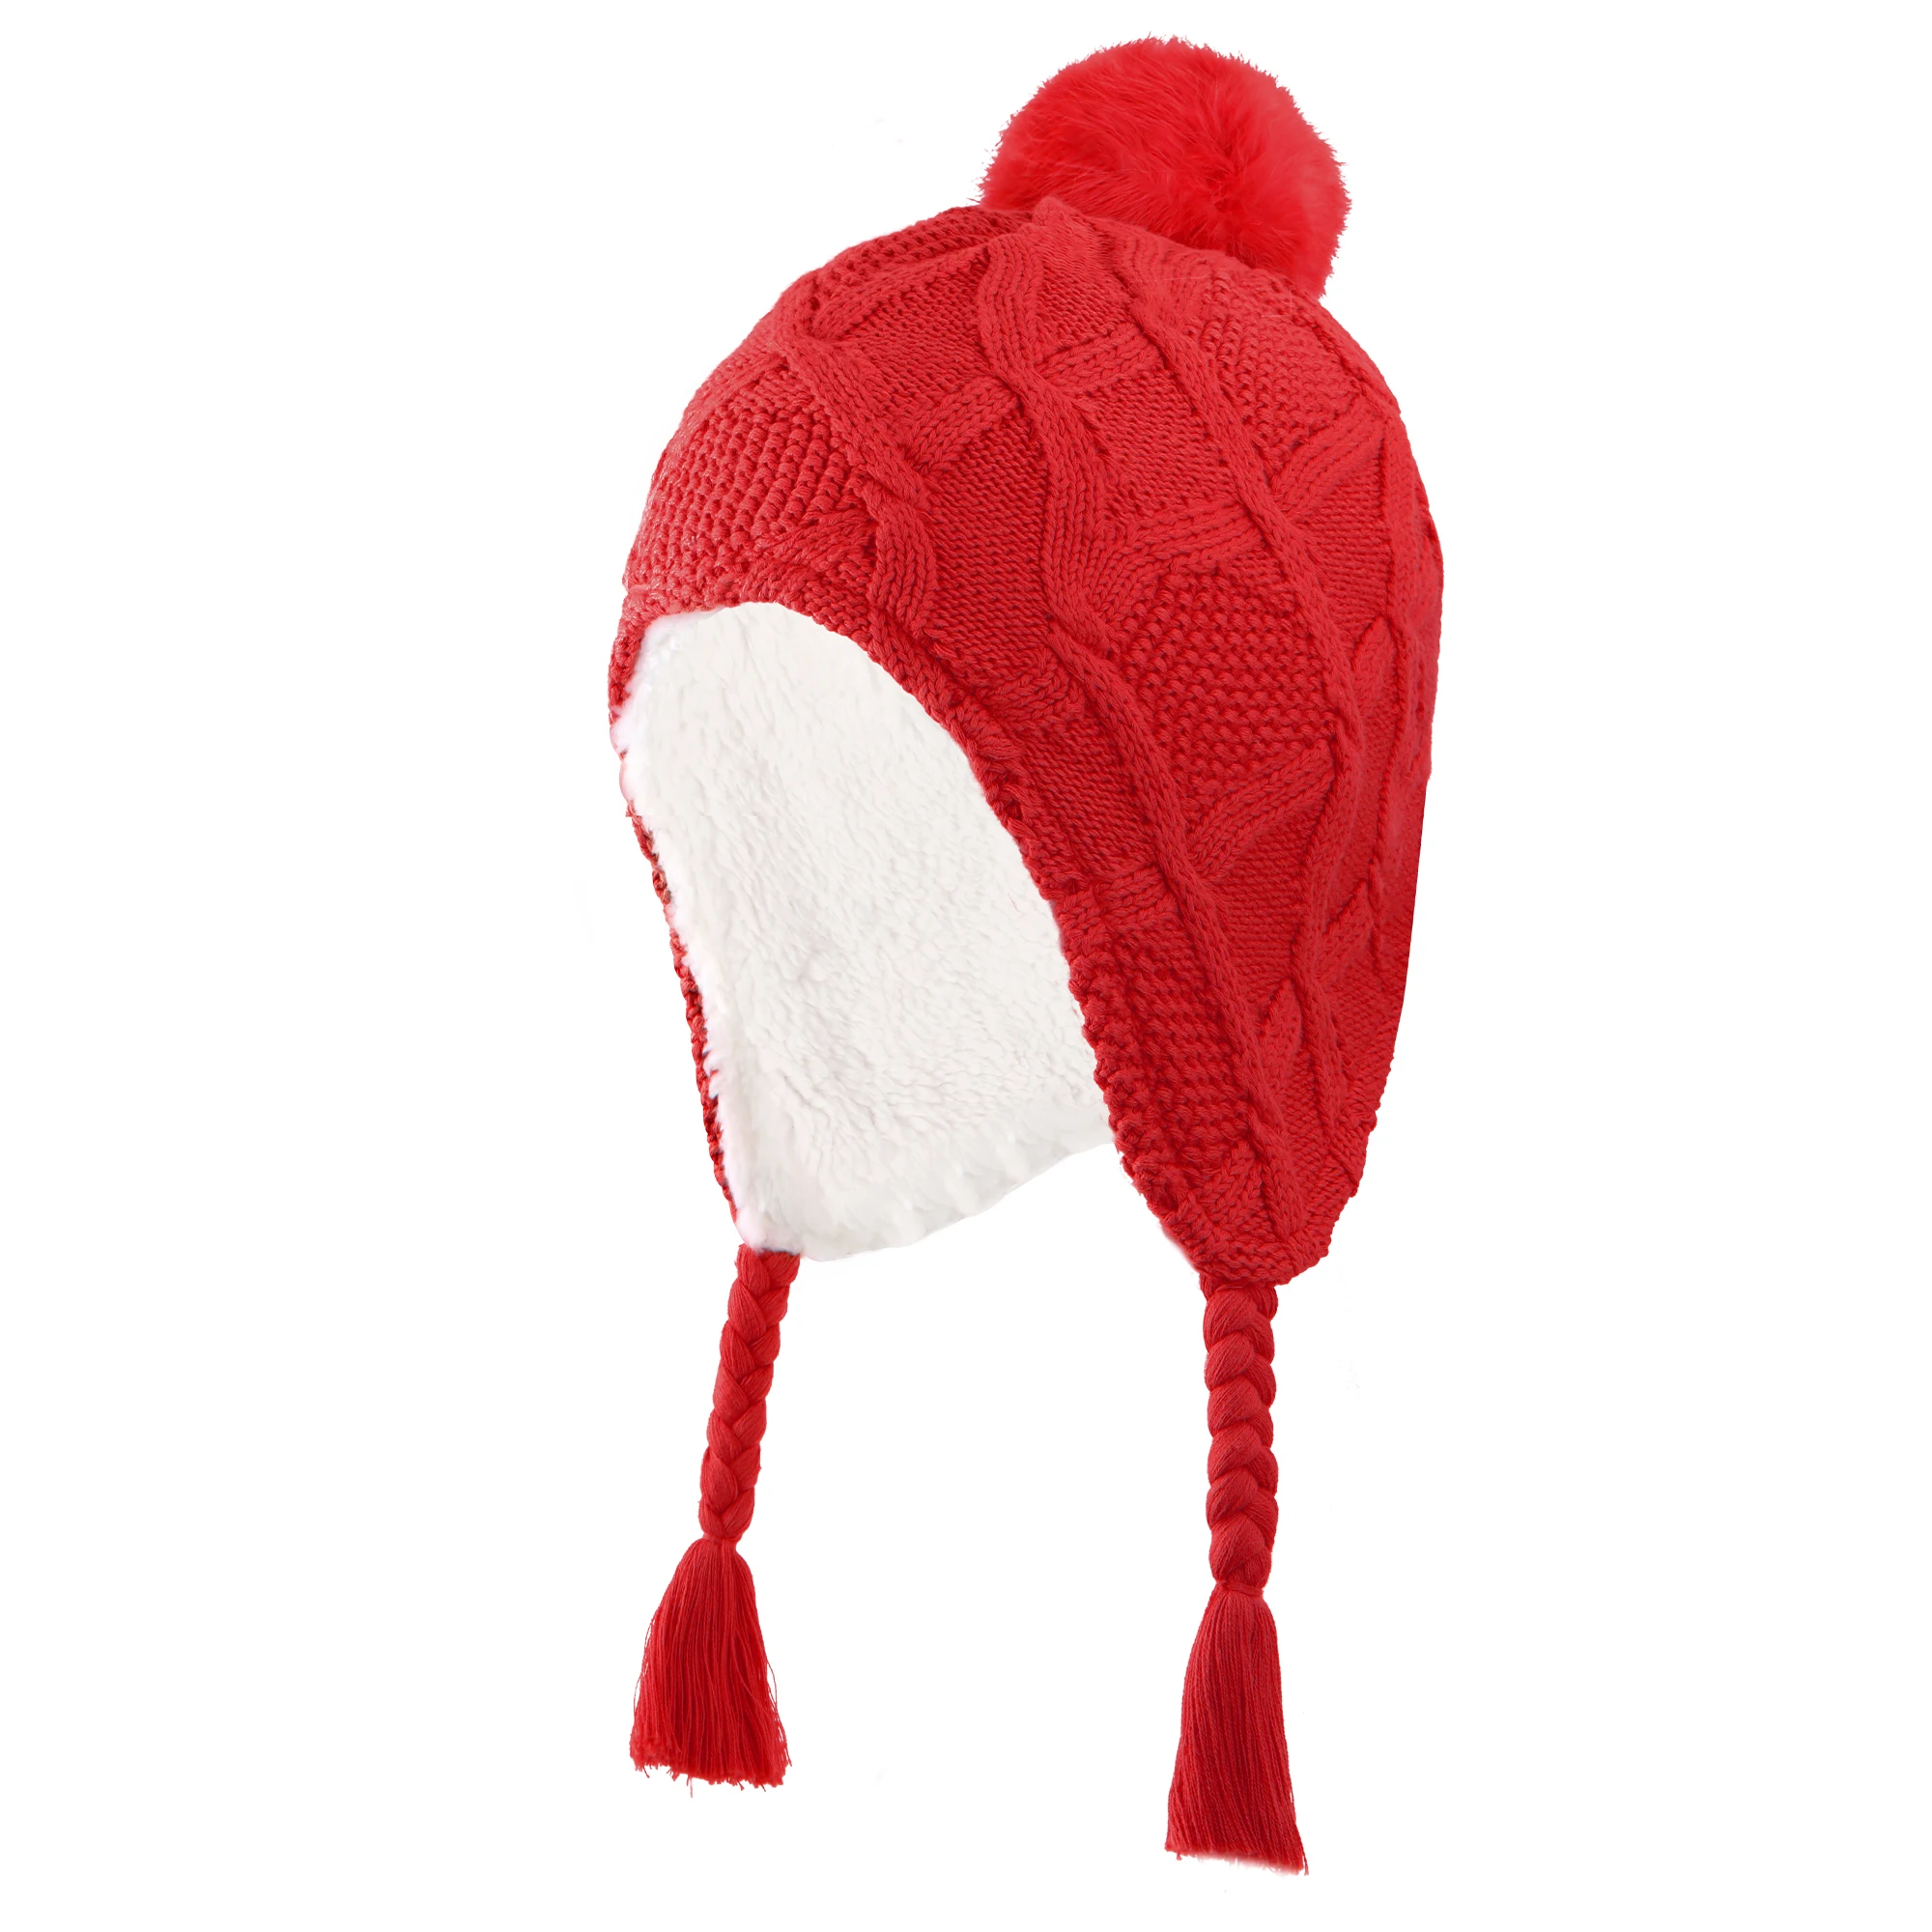 Connectyle Toddler Boys Girls Knit Kids Hat with Earflap Winter Beanie Hats 